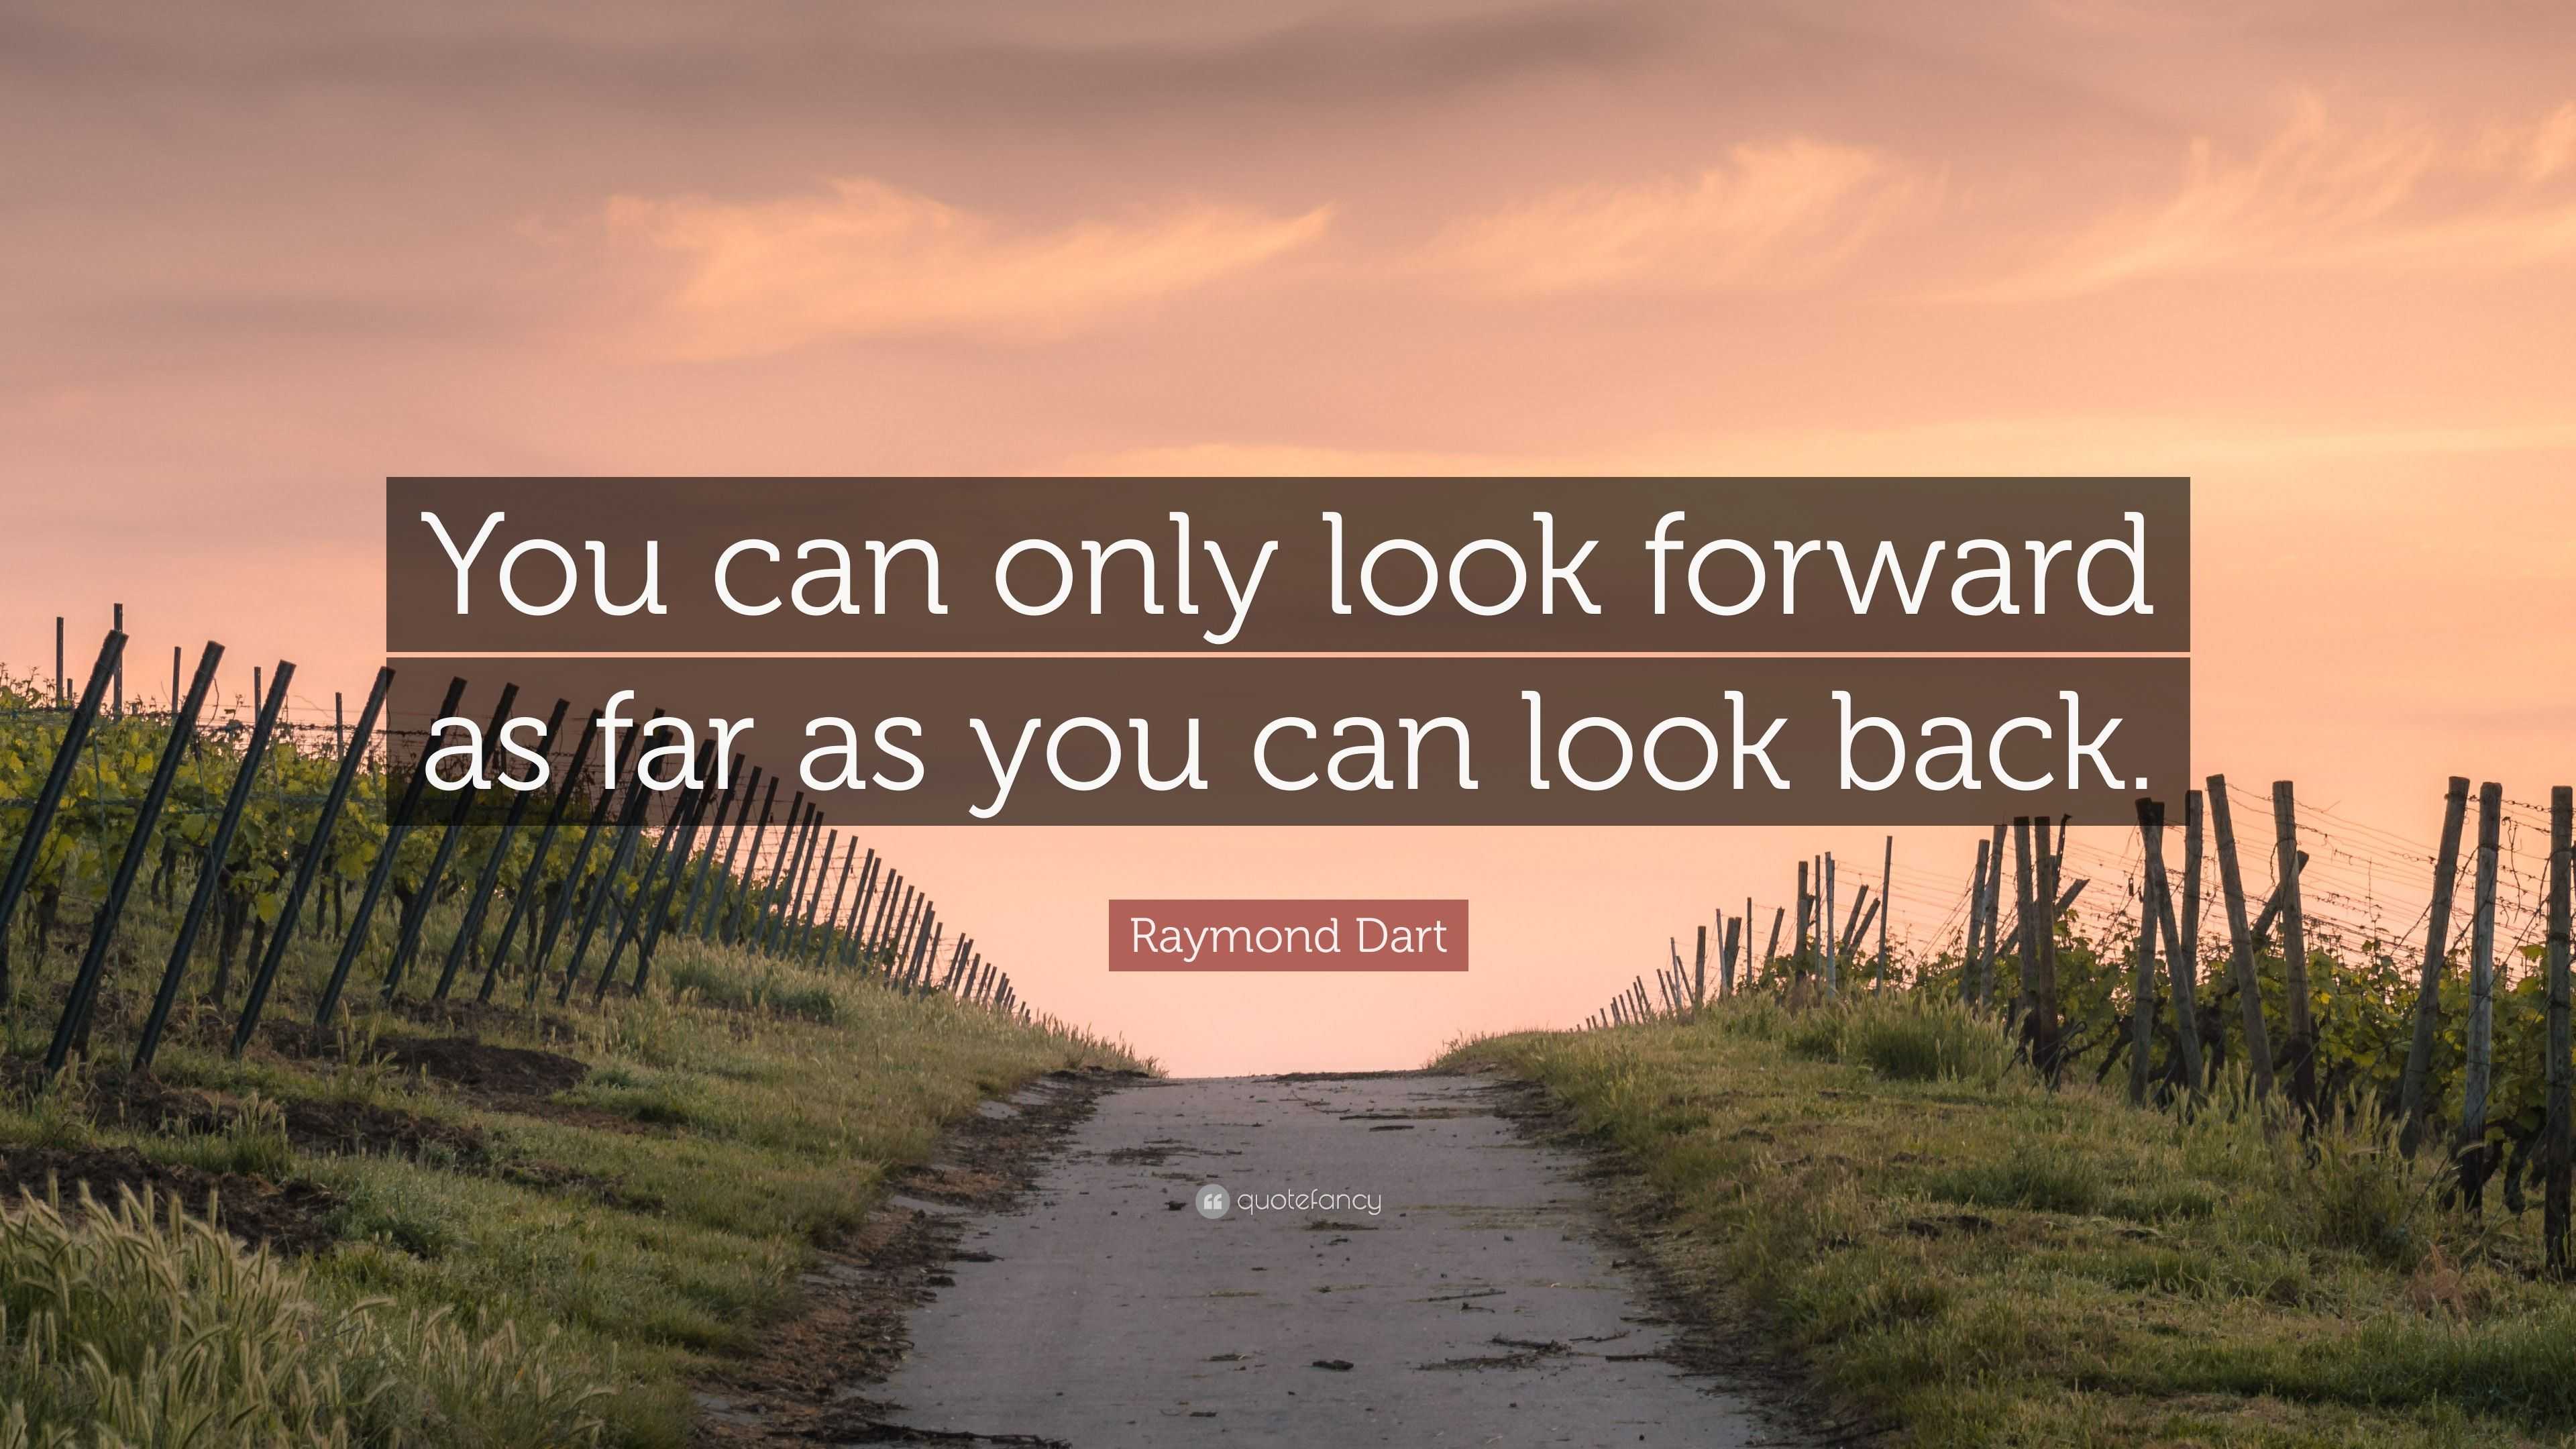 Raymond Dart Quote: “You can only look forward as far as you can look